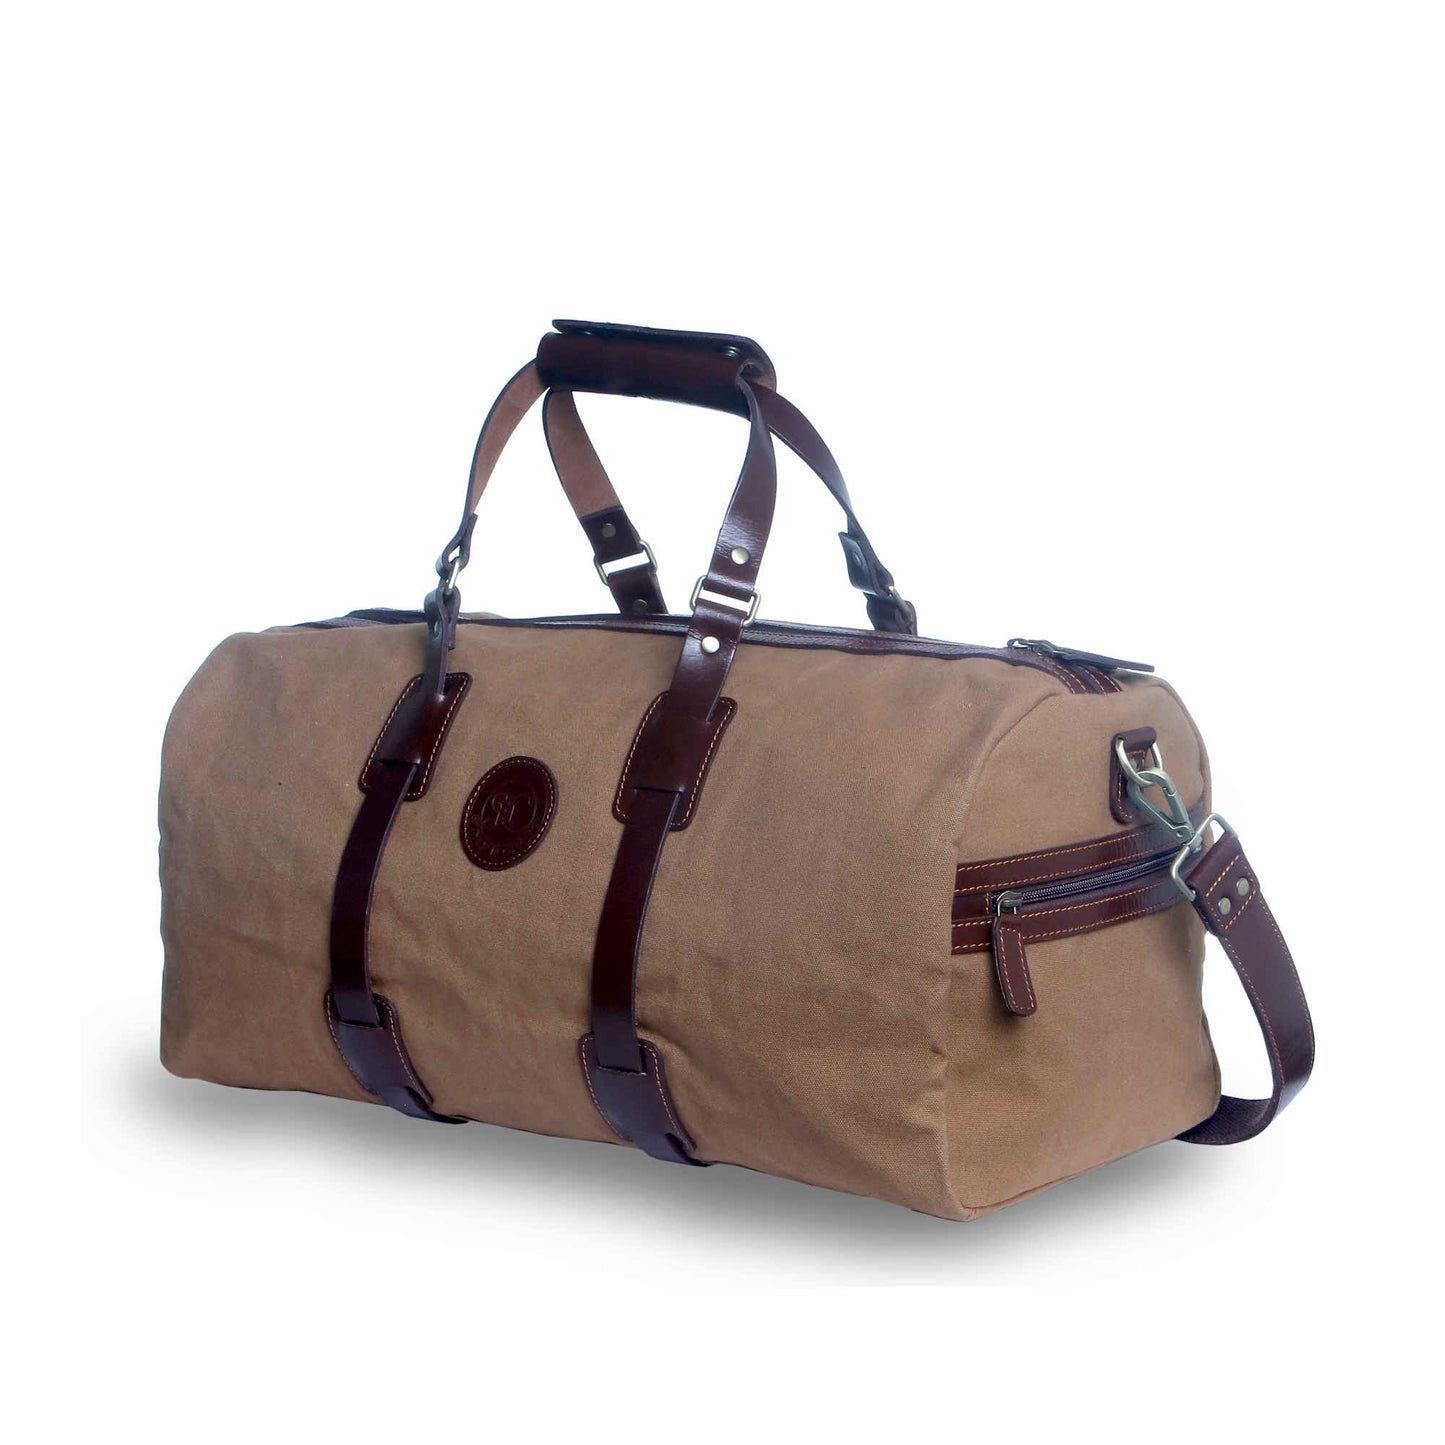 Style n Craft 397101 Duffle Bag in Waterproof Brown Canvas & Full Grain Leather - Front Angled View Showing the Side Zipper Pocket